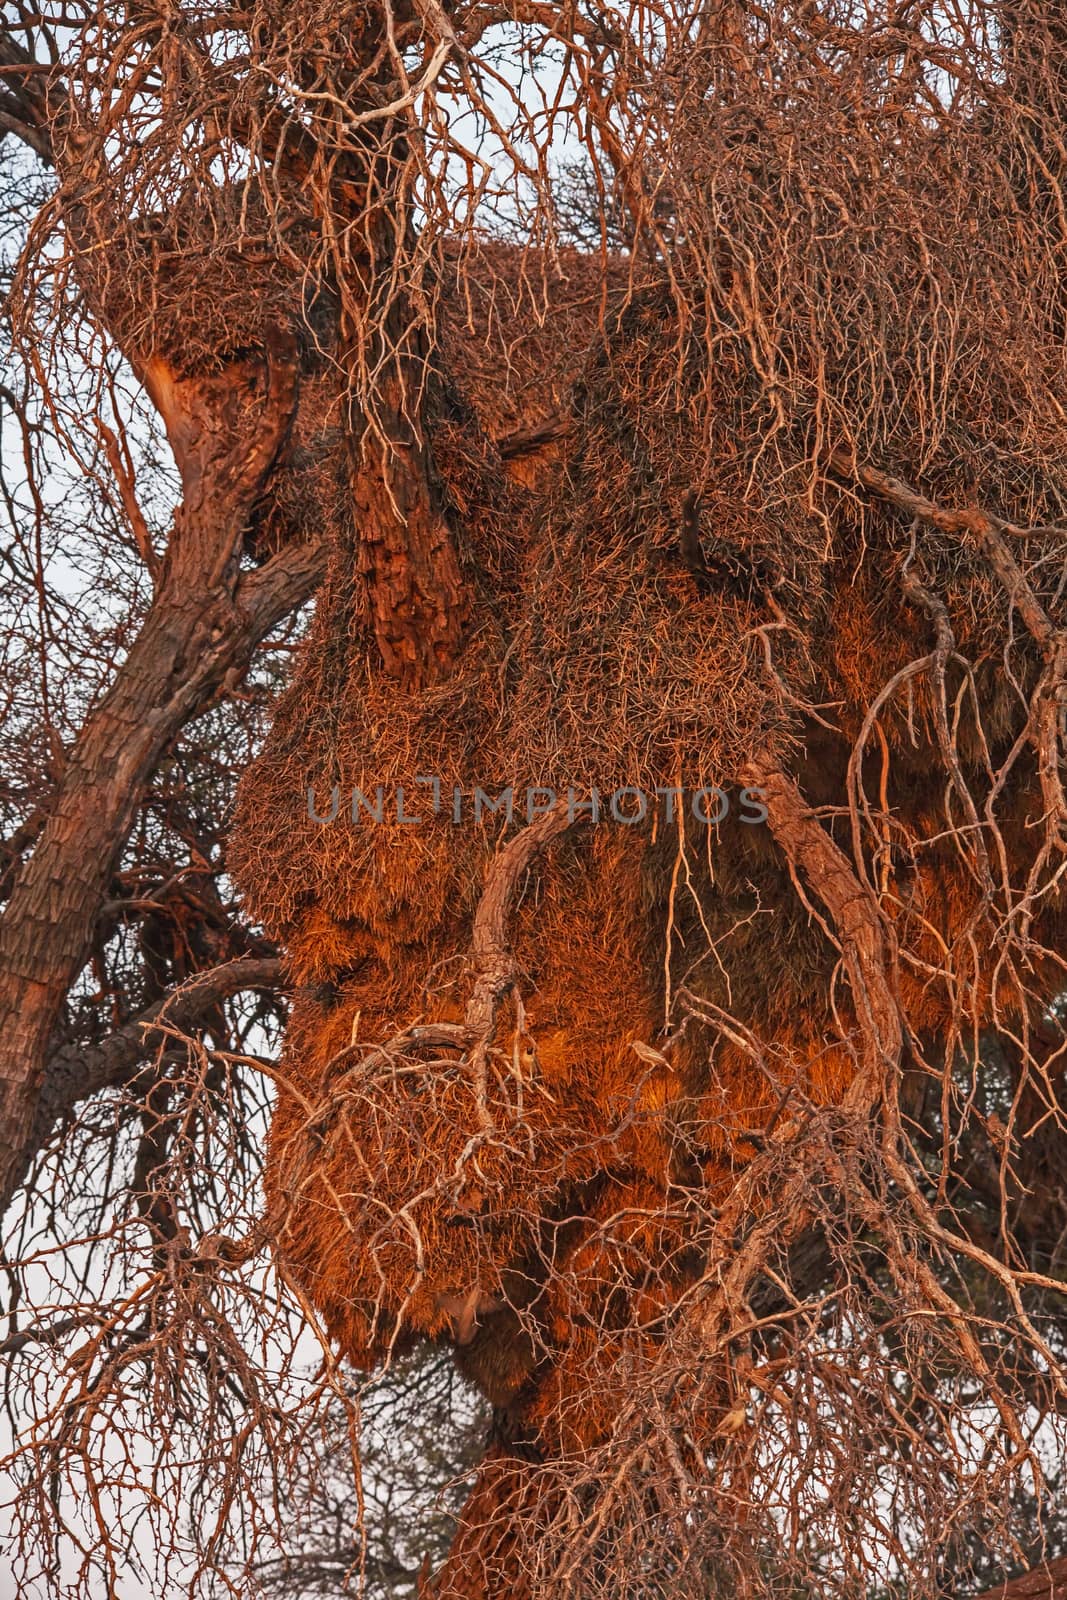 A large Social Weaver (Piletairus socius) nest in a Camelthorn (Vachellia erioloba) tree in the Kgalagadi Trans Frontier Park, South Africa